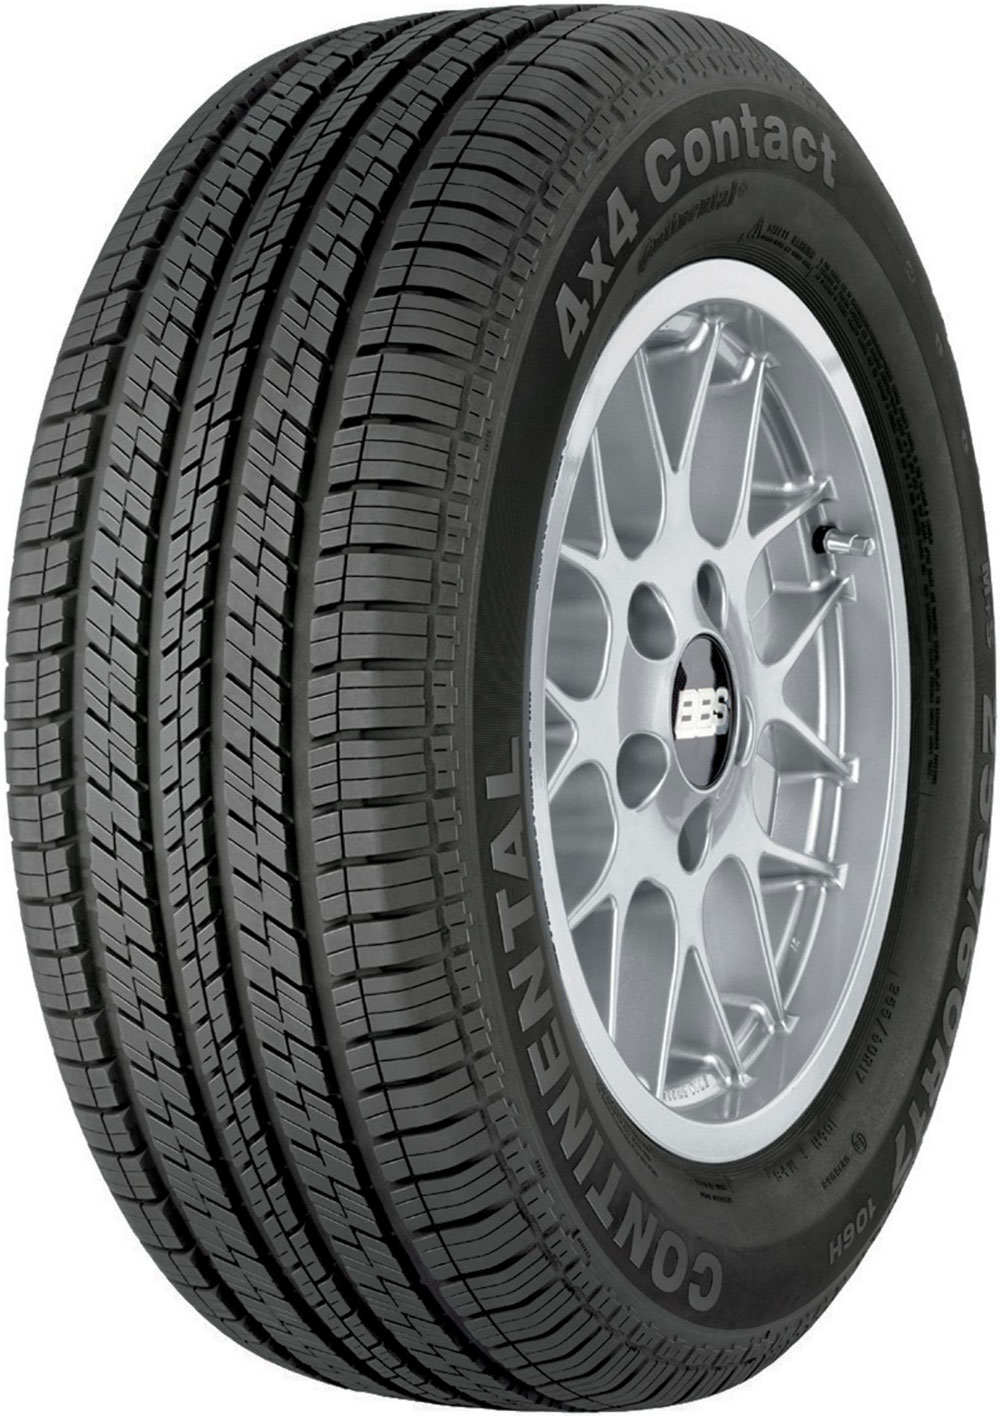 Anvelope auto CONTINENTAL Conti 4x4 Contact 195/80 R15 96